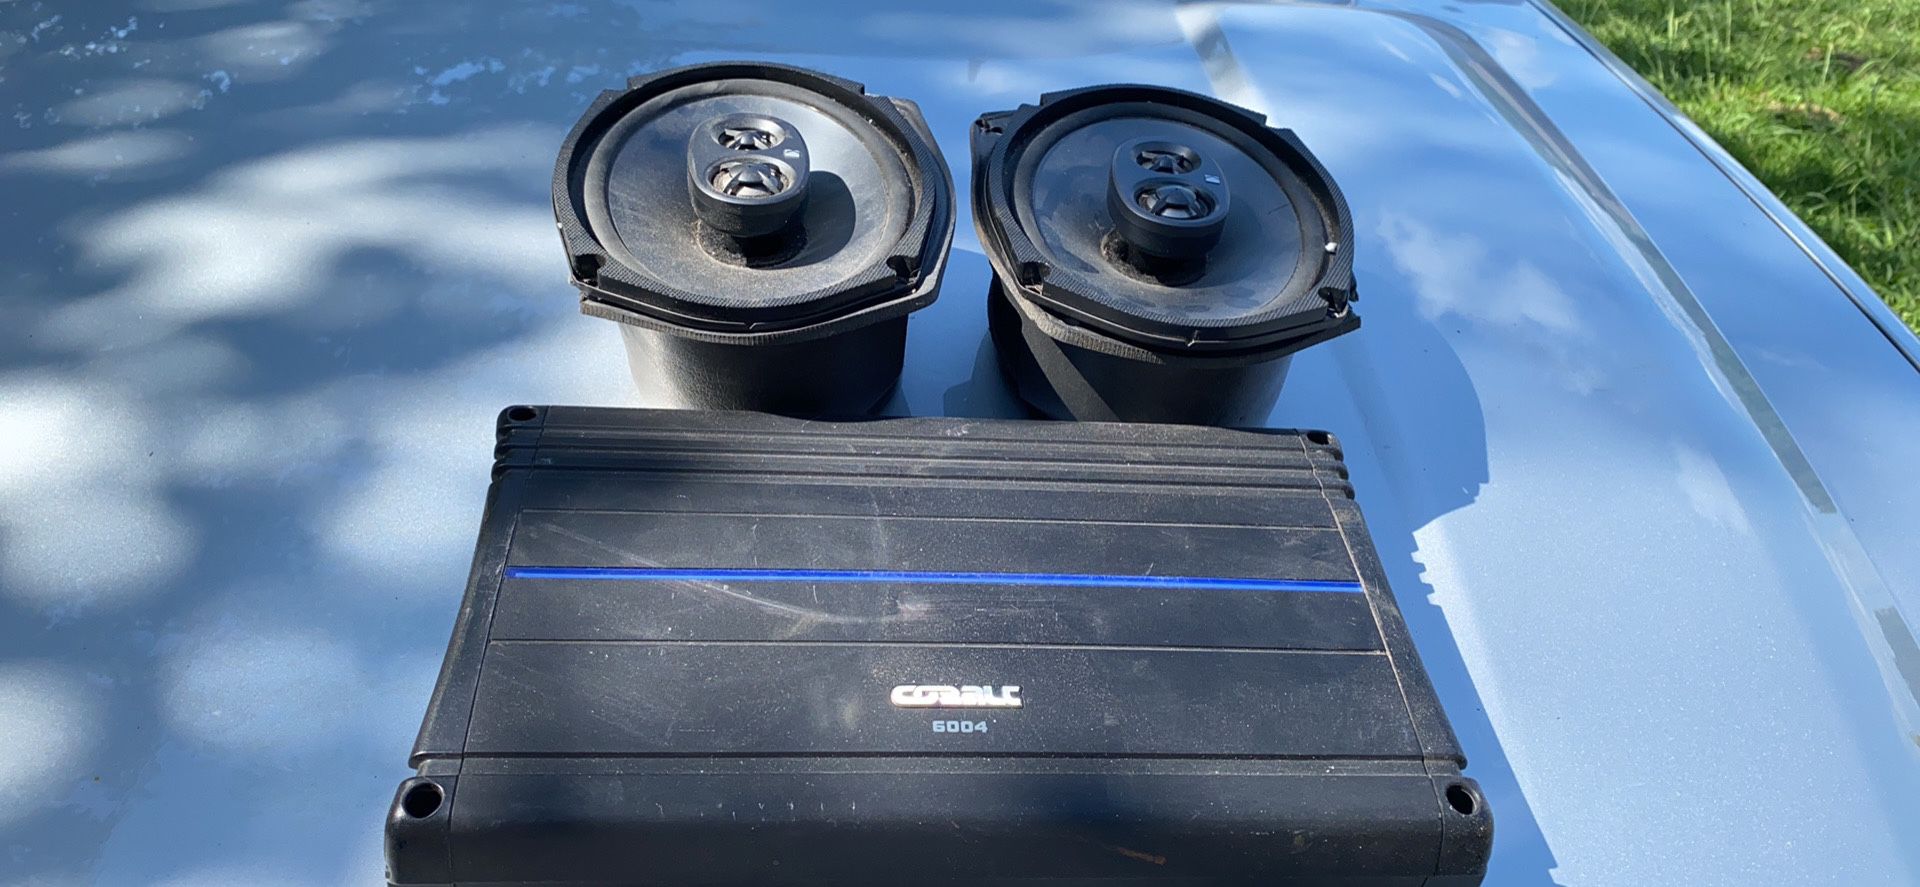 Kicker 6x9s and Orion amplifier